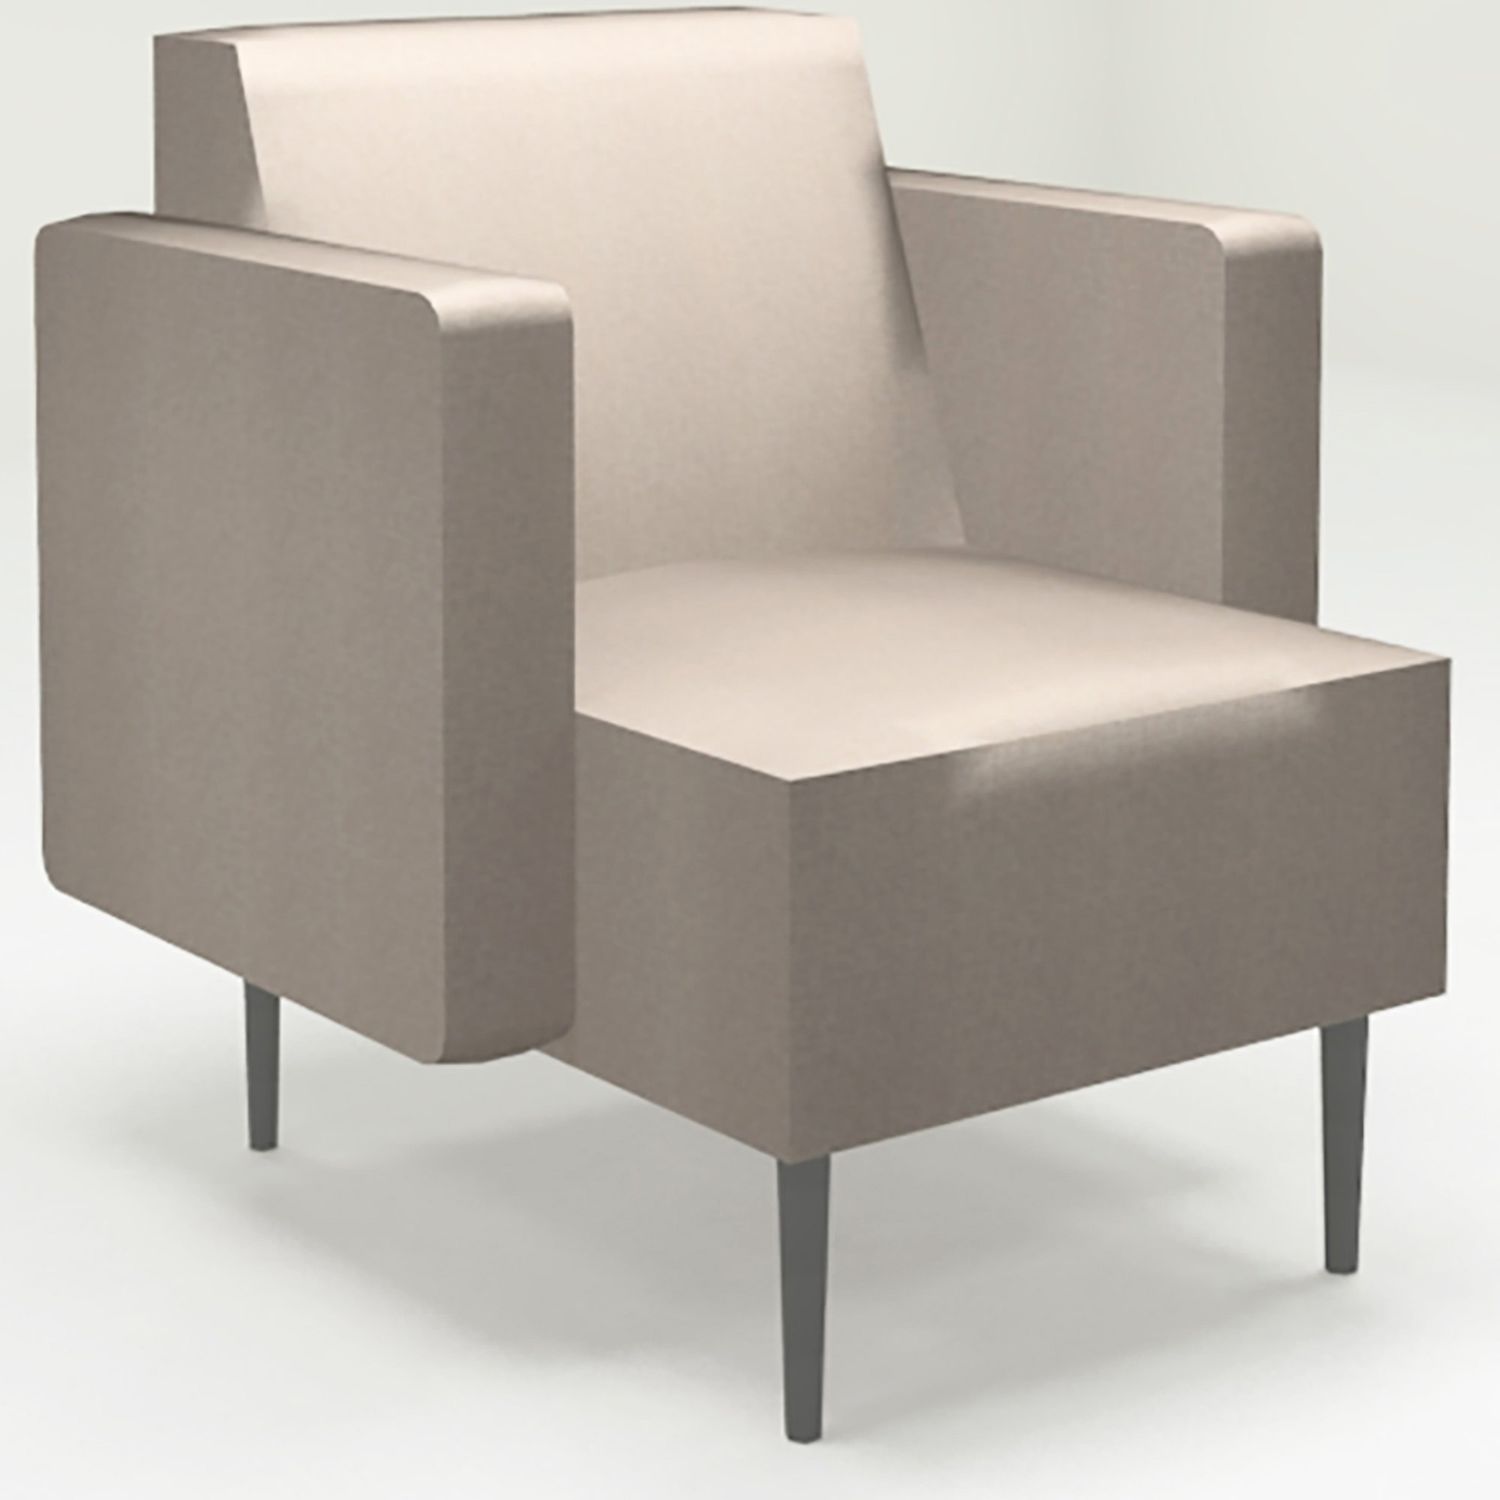 5801 Club Chair with Arms 30" x 31" x 34" , 22" x 20" x 19.5" Seat, Material: Brushed Aluminum Leg, Finish: Infinity Sable